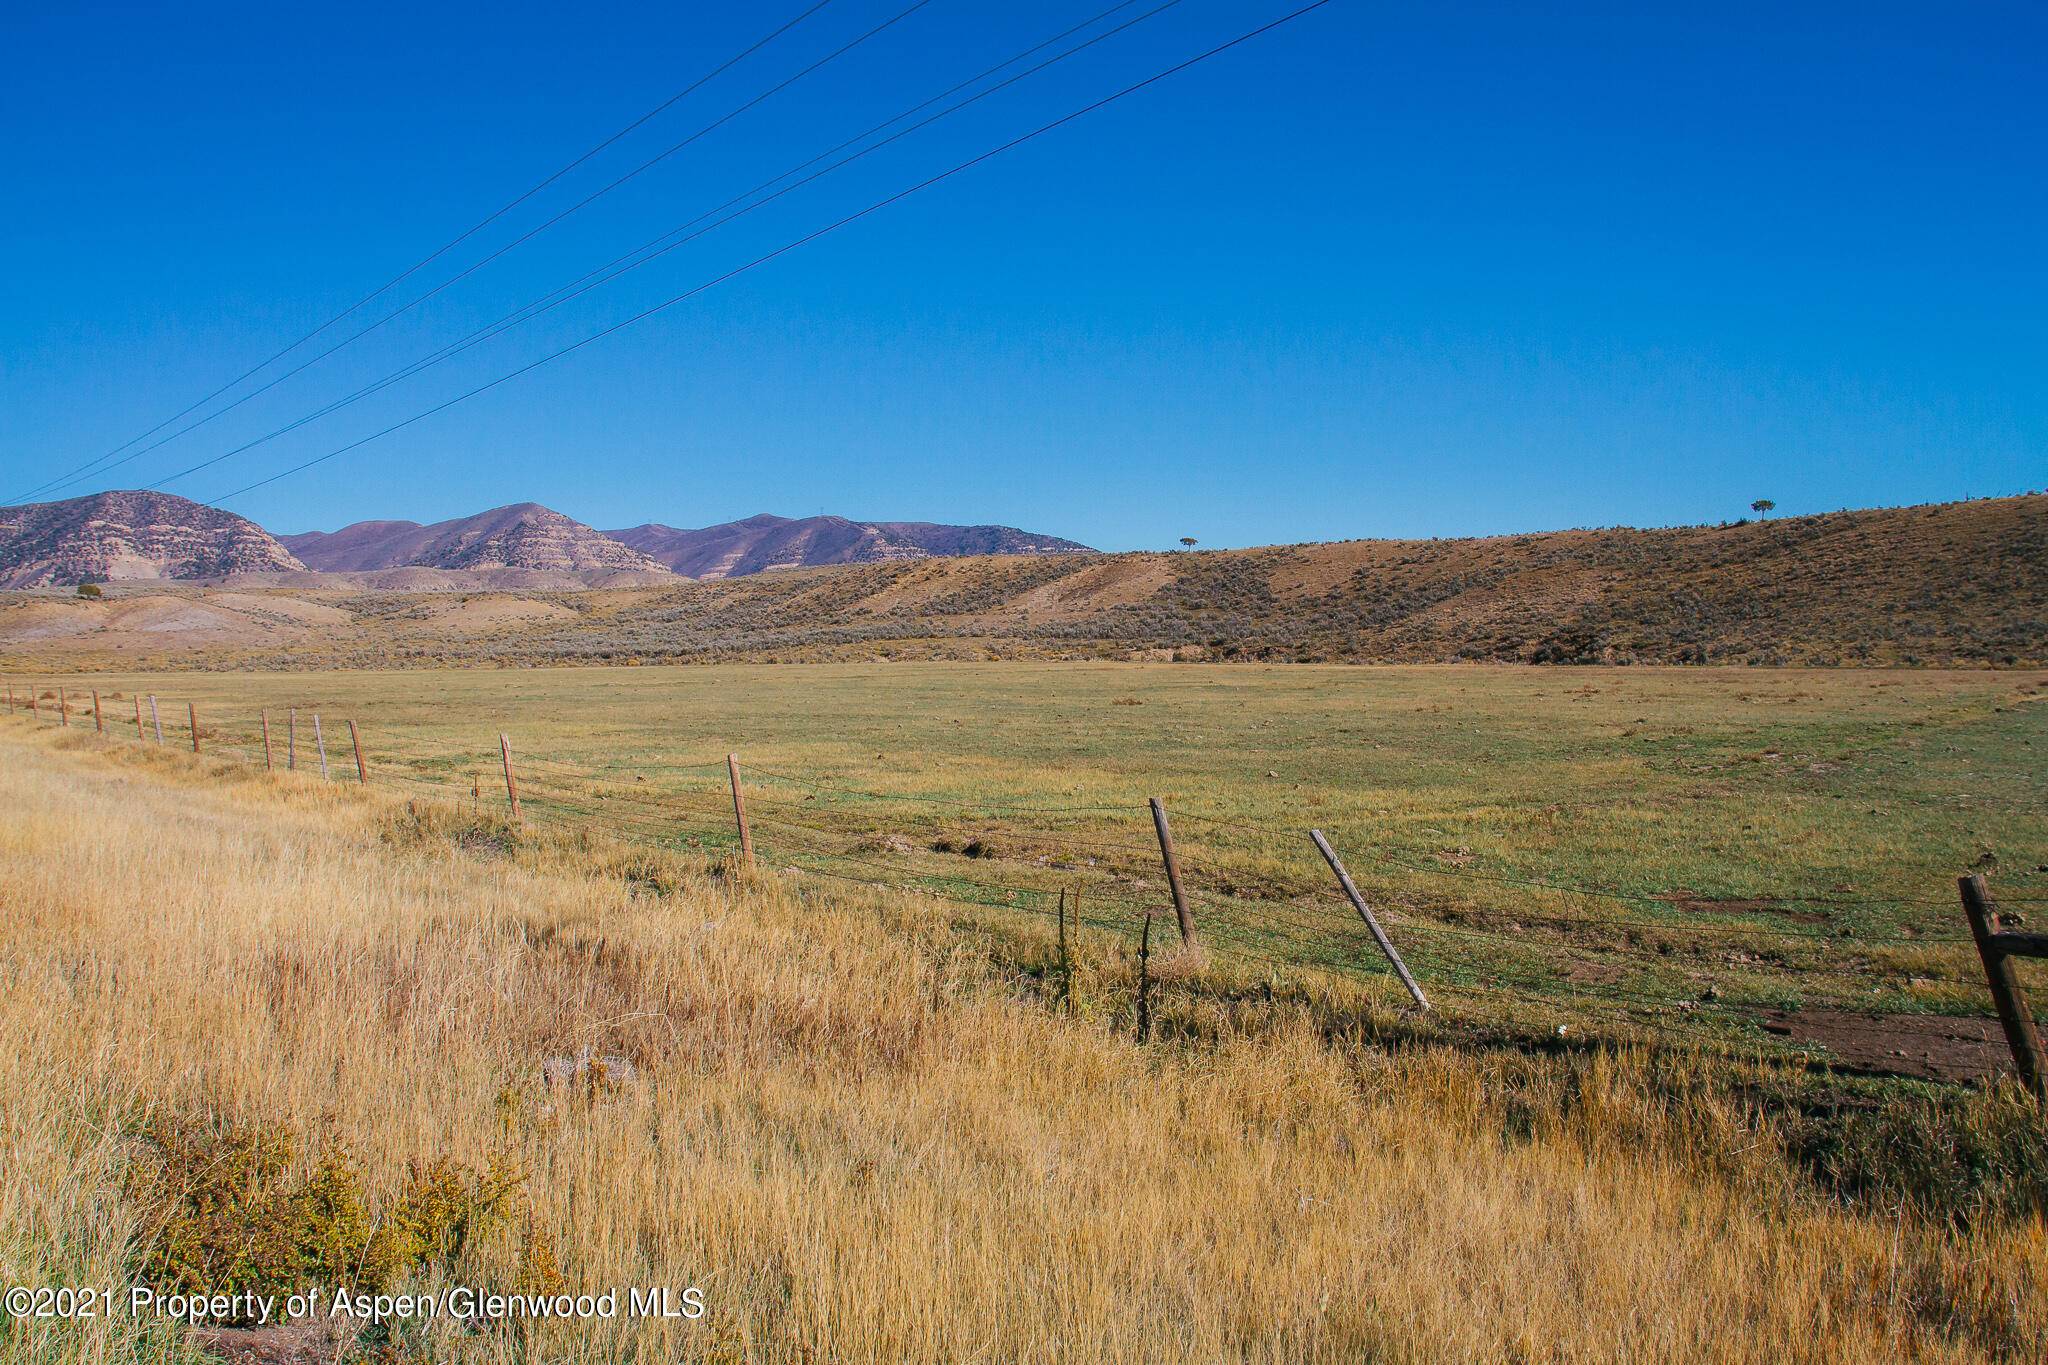 Located at the intersection of Highway 13 and County Road 15, this vacant land is truly the future of Meeker, Colorado.